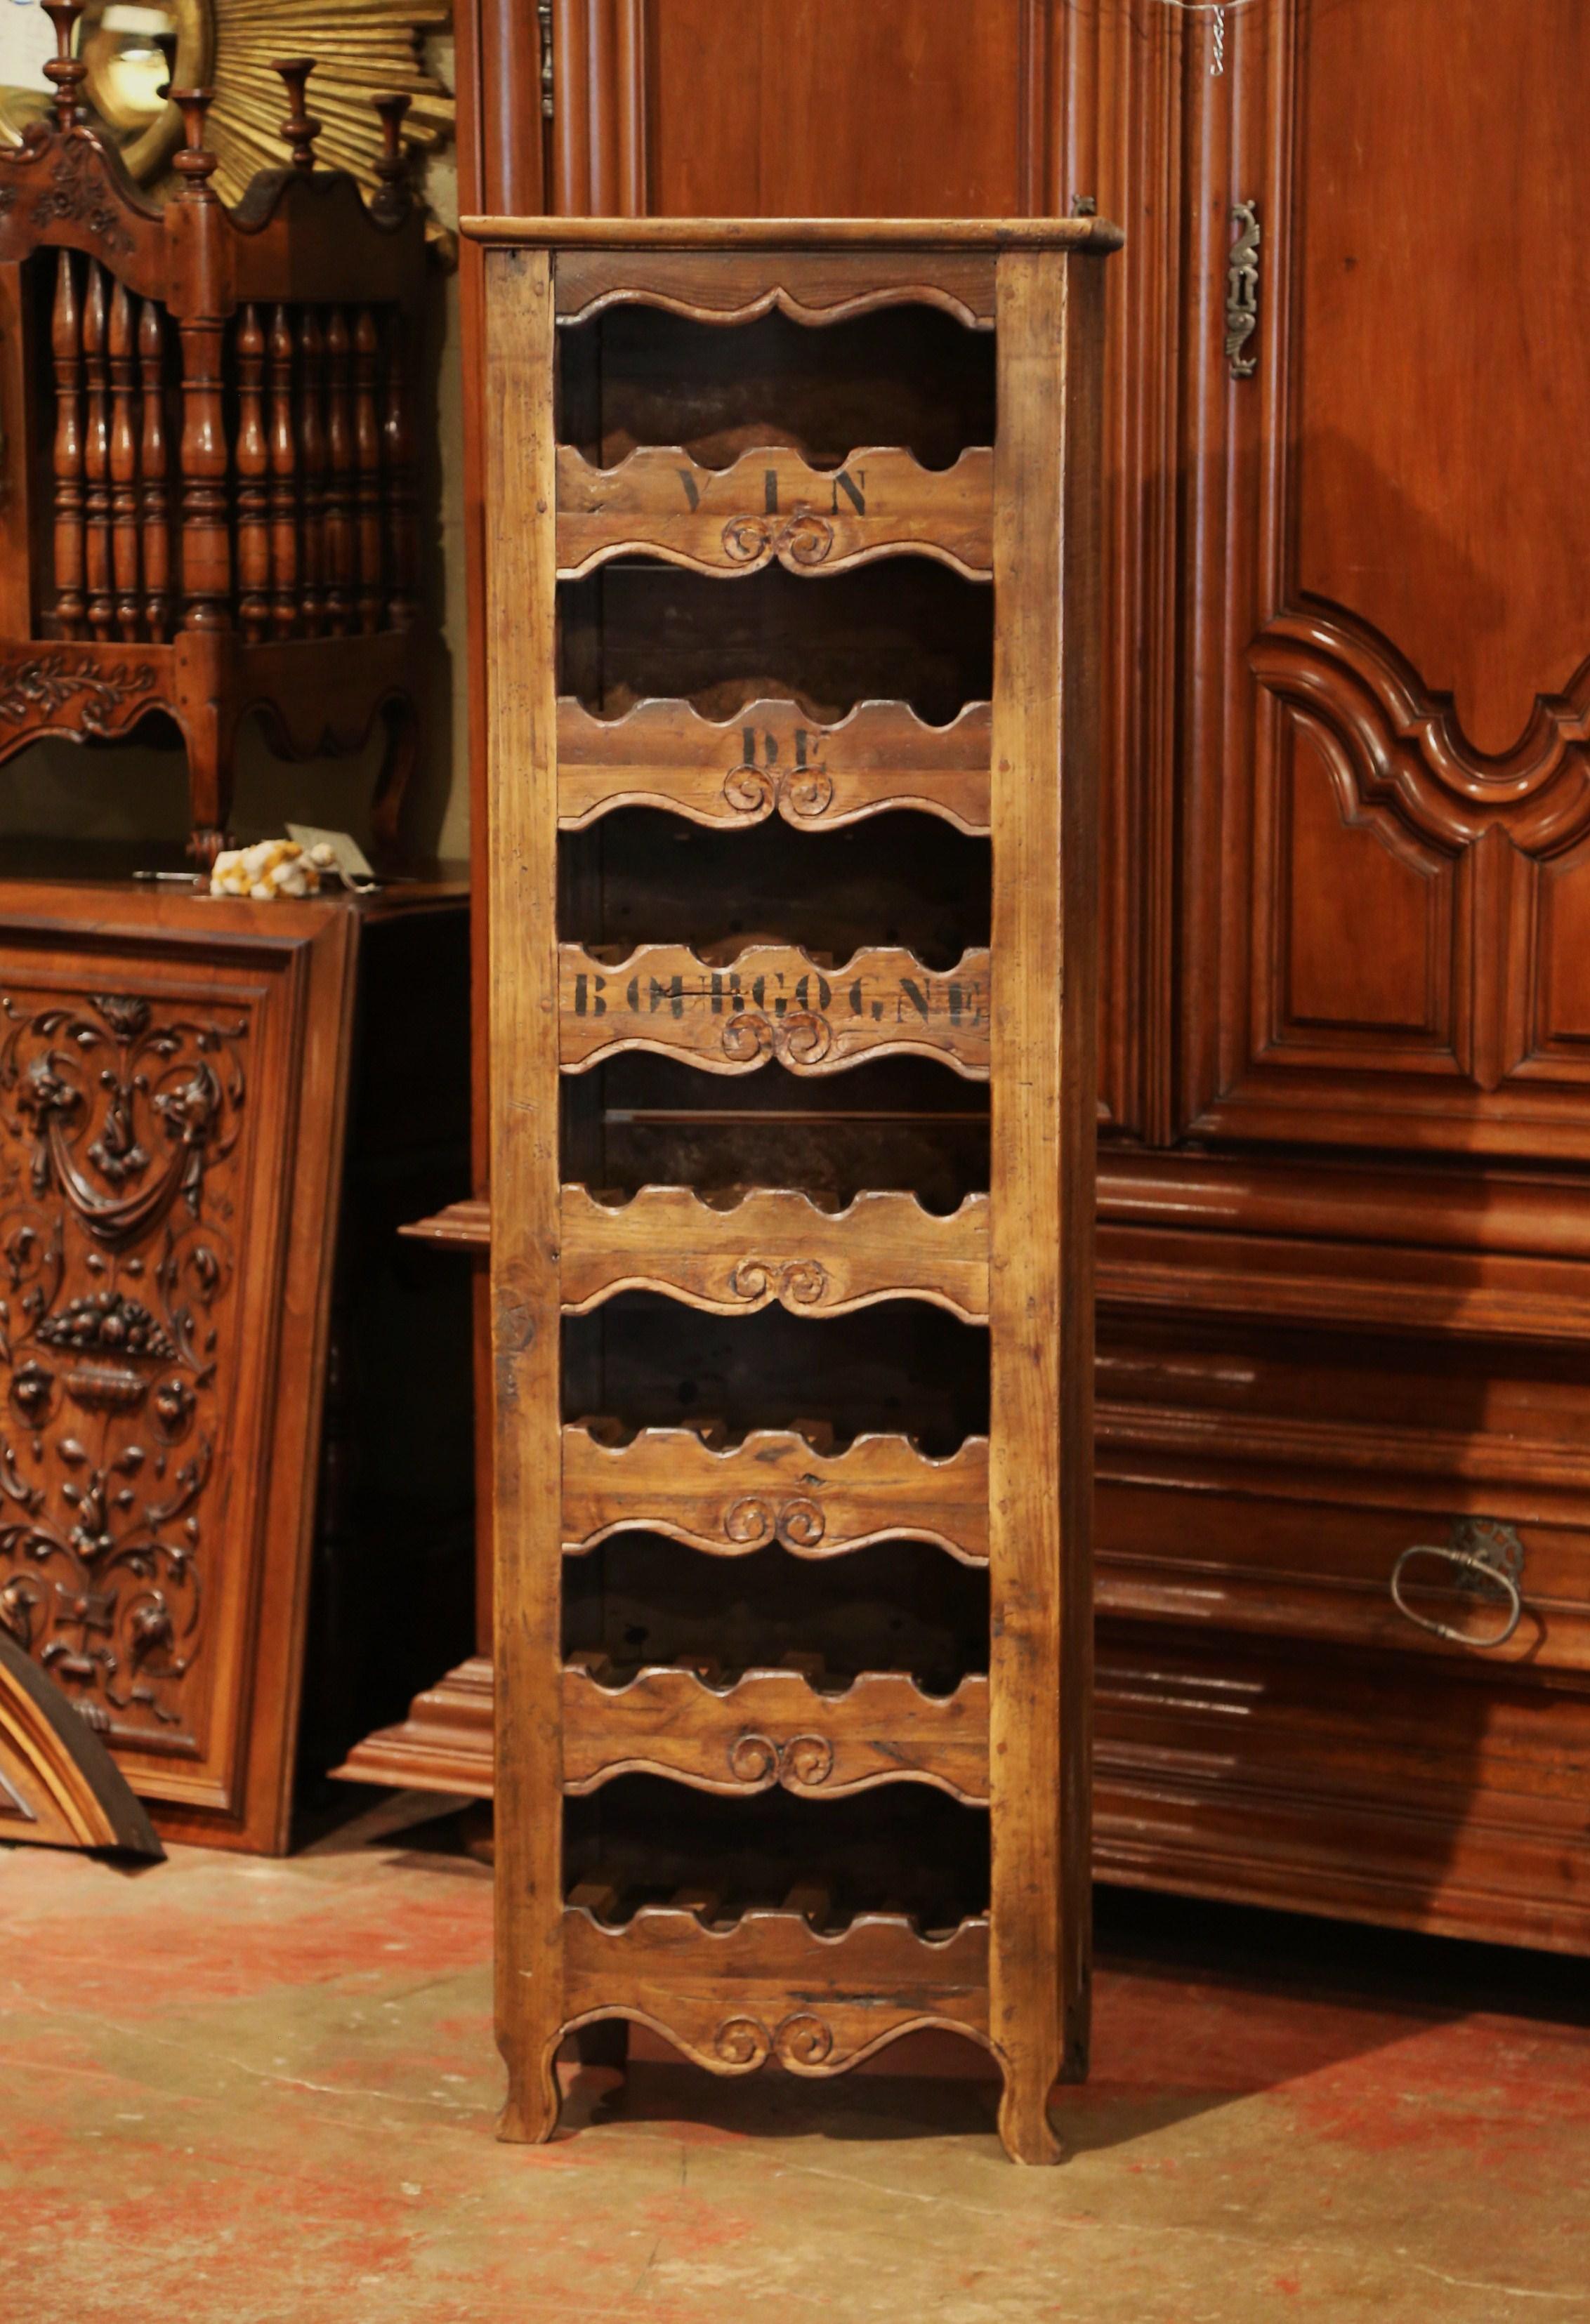 This elegant, antique wine storage cabinet was crafted in western France using old timber. The simple, tall, thin pine cabinet sits on four small scroll feet under a scalloped apron, and features seven shelves with decorative carvings. Each row